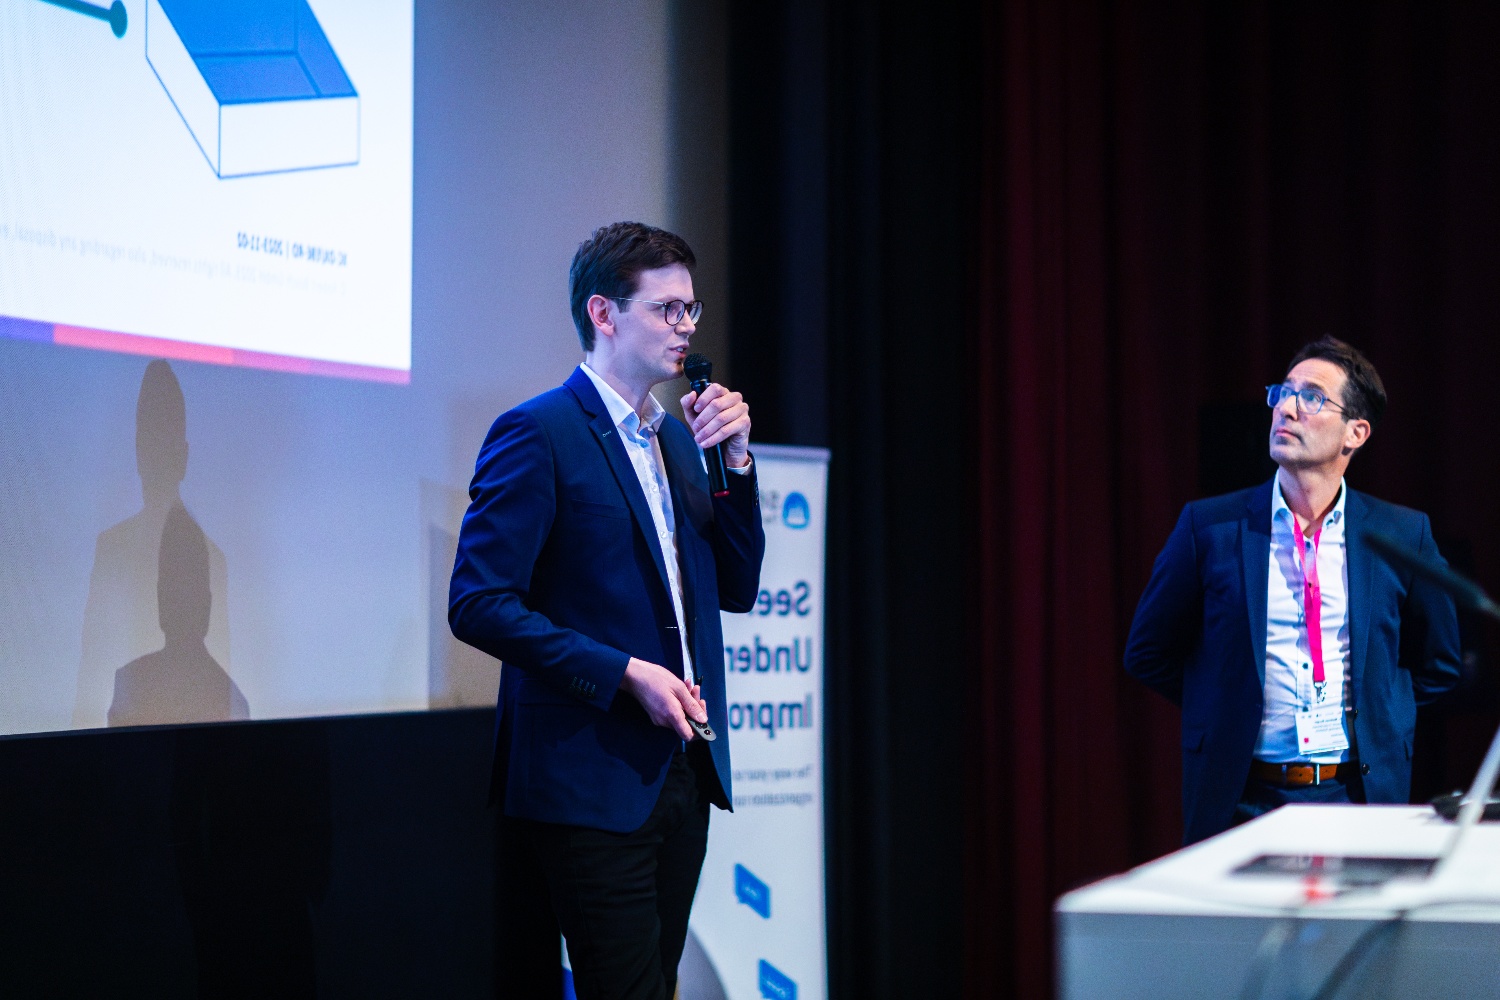 Felix Meyer zu Driehausen and Dr. Matthias Burger of Bosch Presenting Together at the Sharing the Roadmap Executive Summit-1